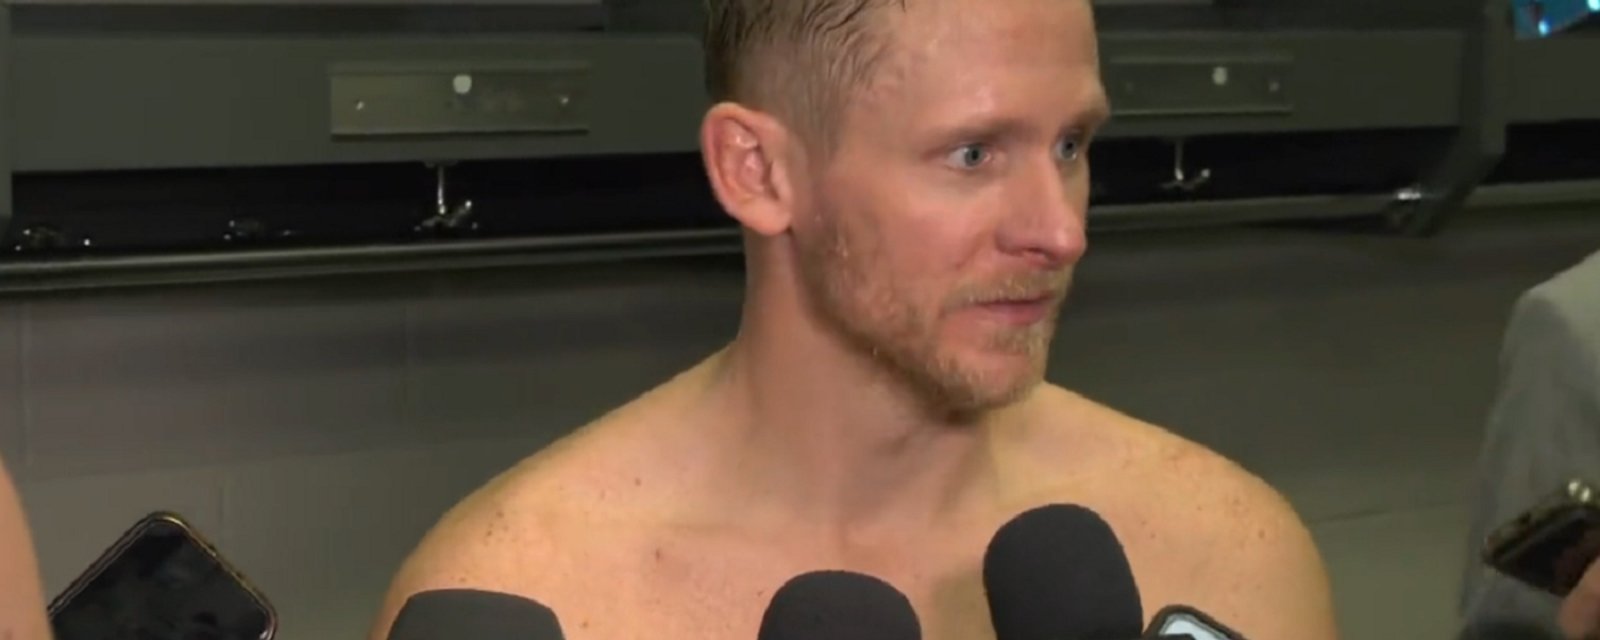 Corey Perry reacts to being cheered by fans in Montreal.